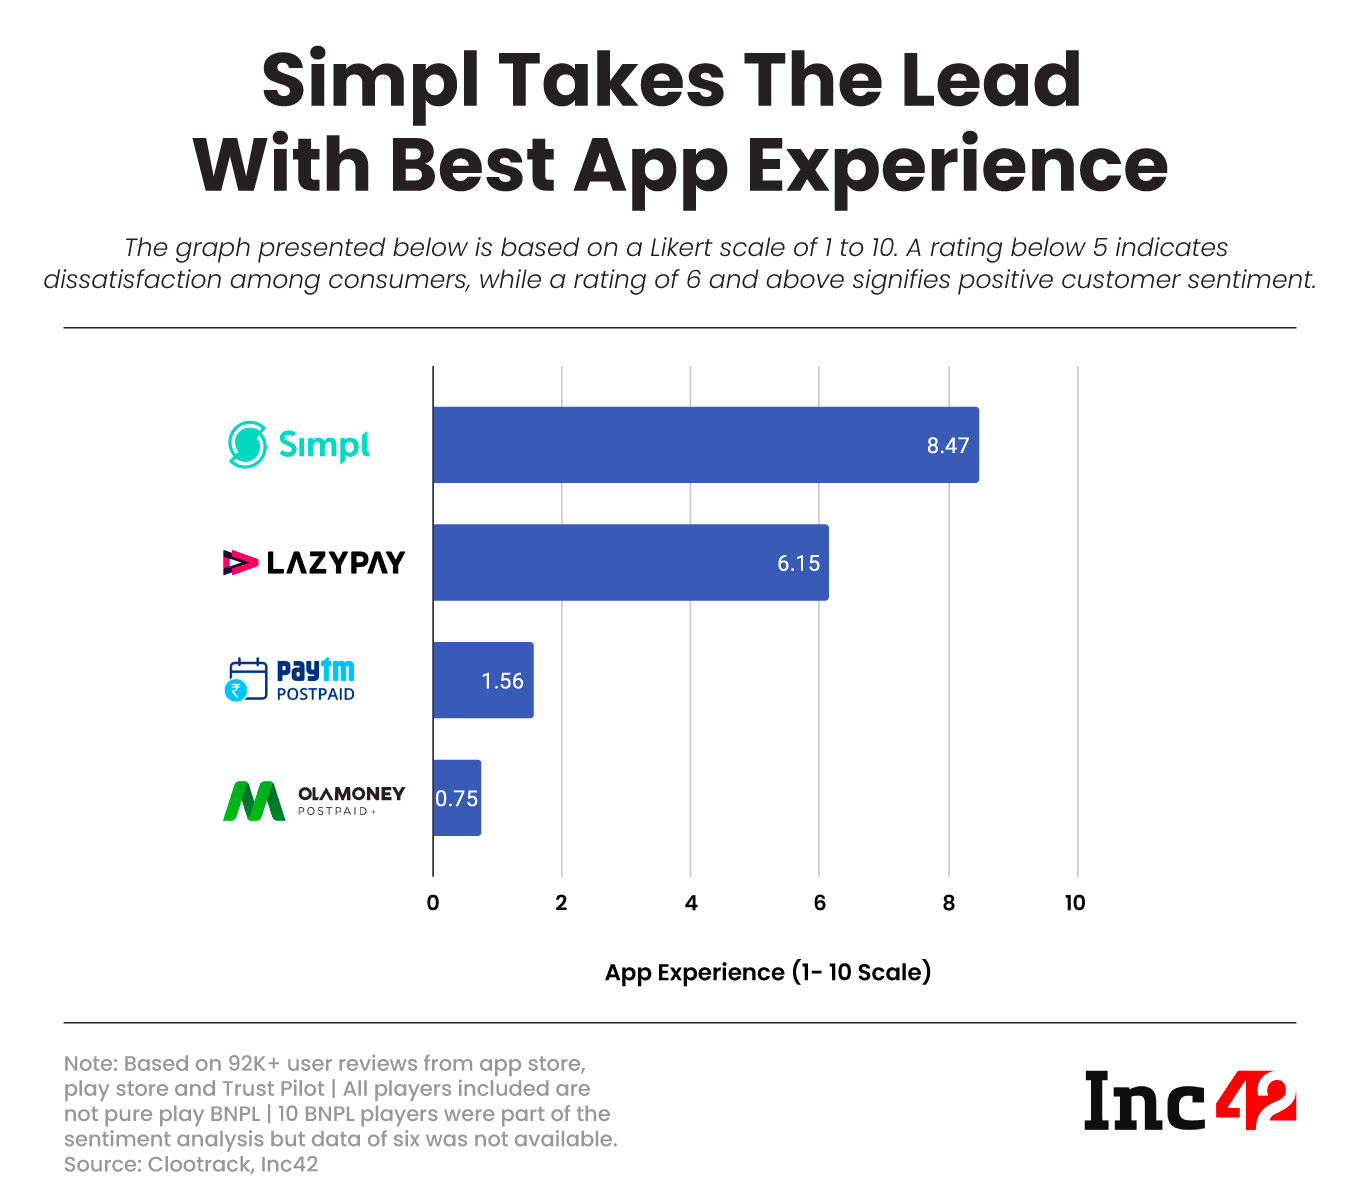 Simpl Takes The Lead With the Best App Experience 